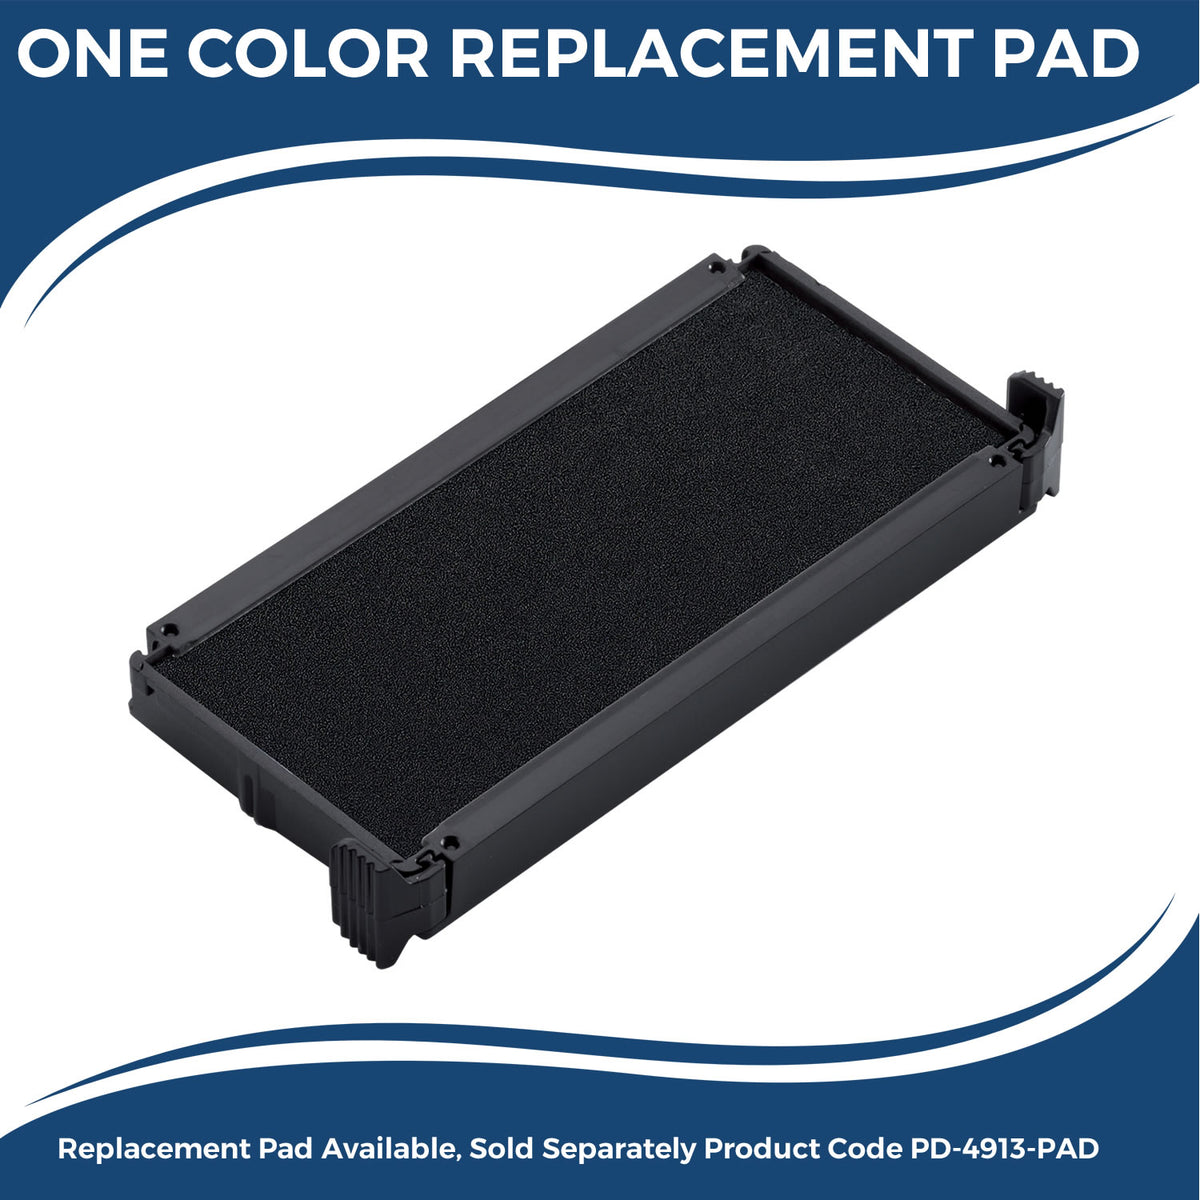 Large Self-Inking Outline Sample Stamp 5589S Large Replacment Pad